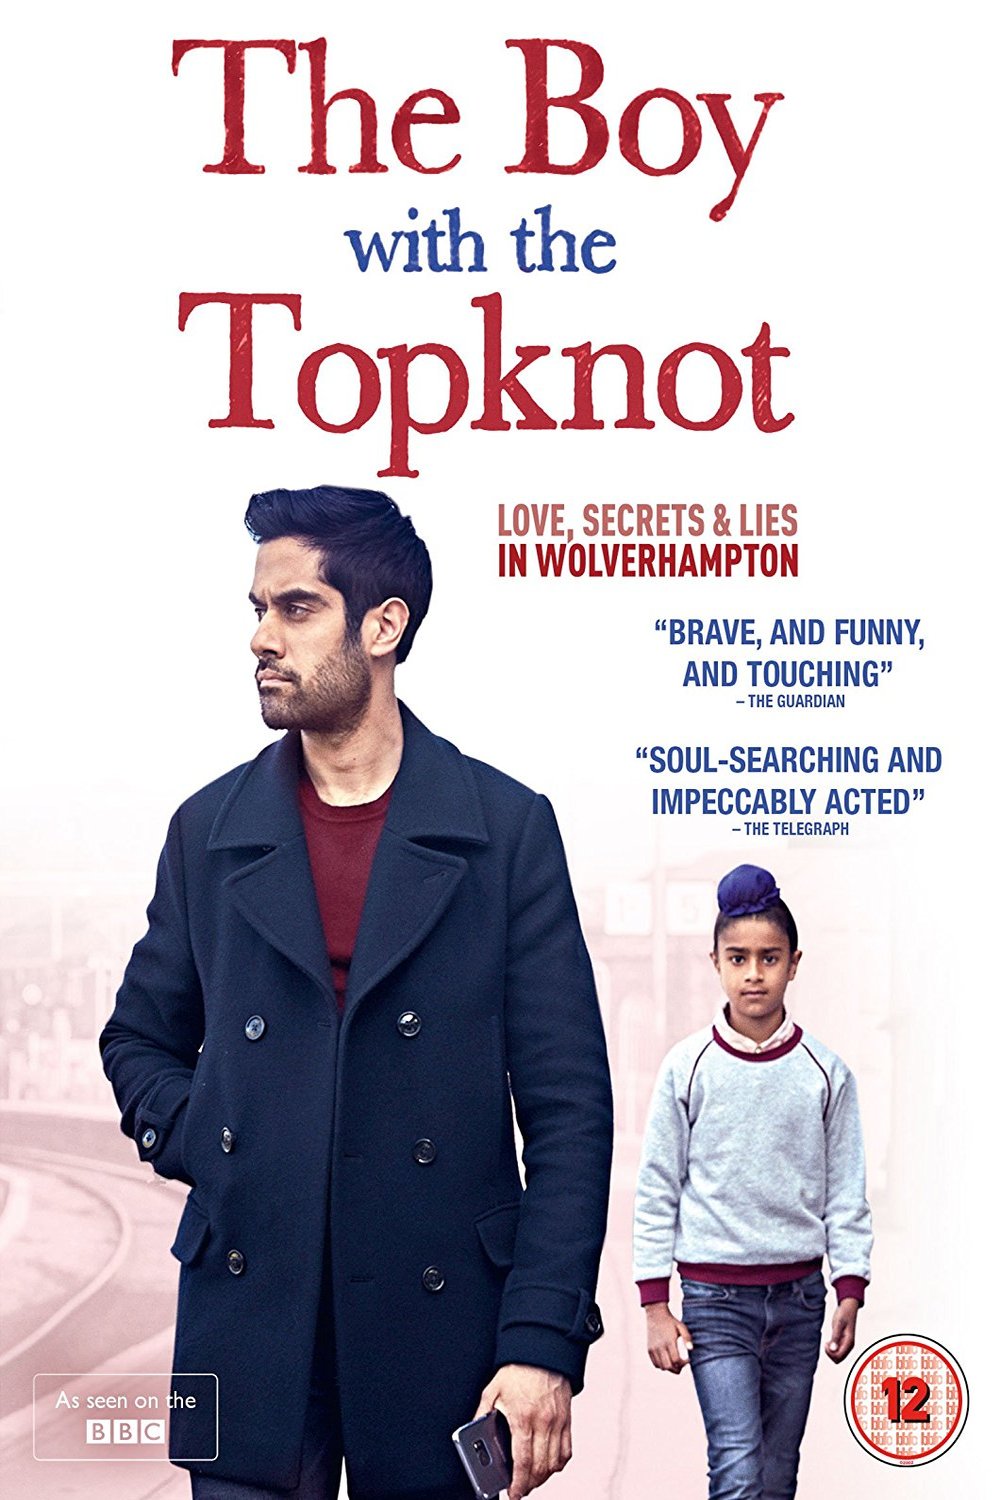 Poster of the movie The Boy with the Topknot